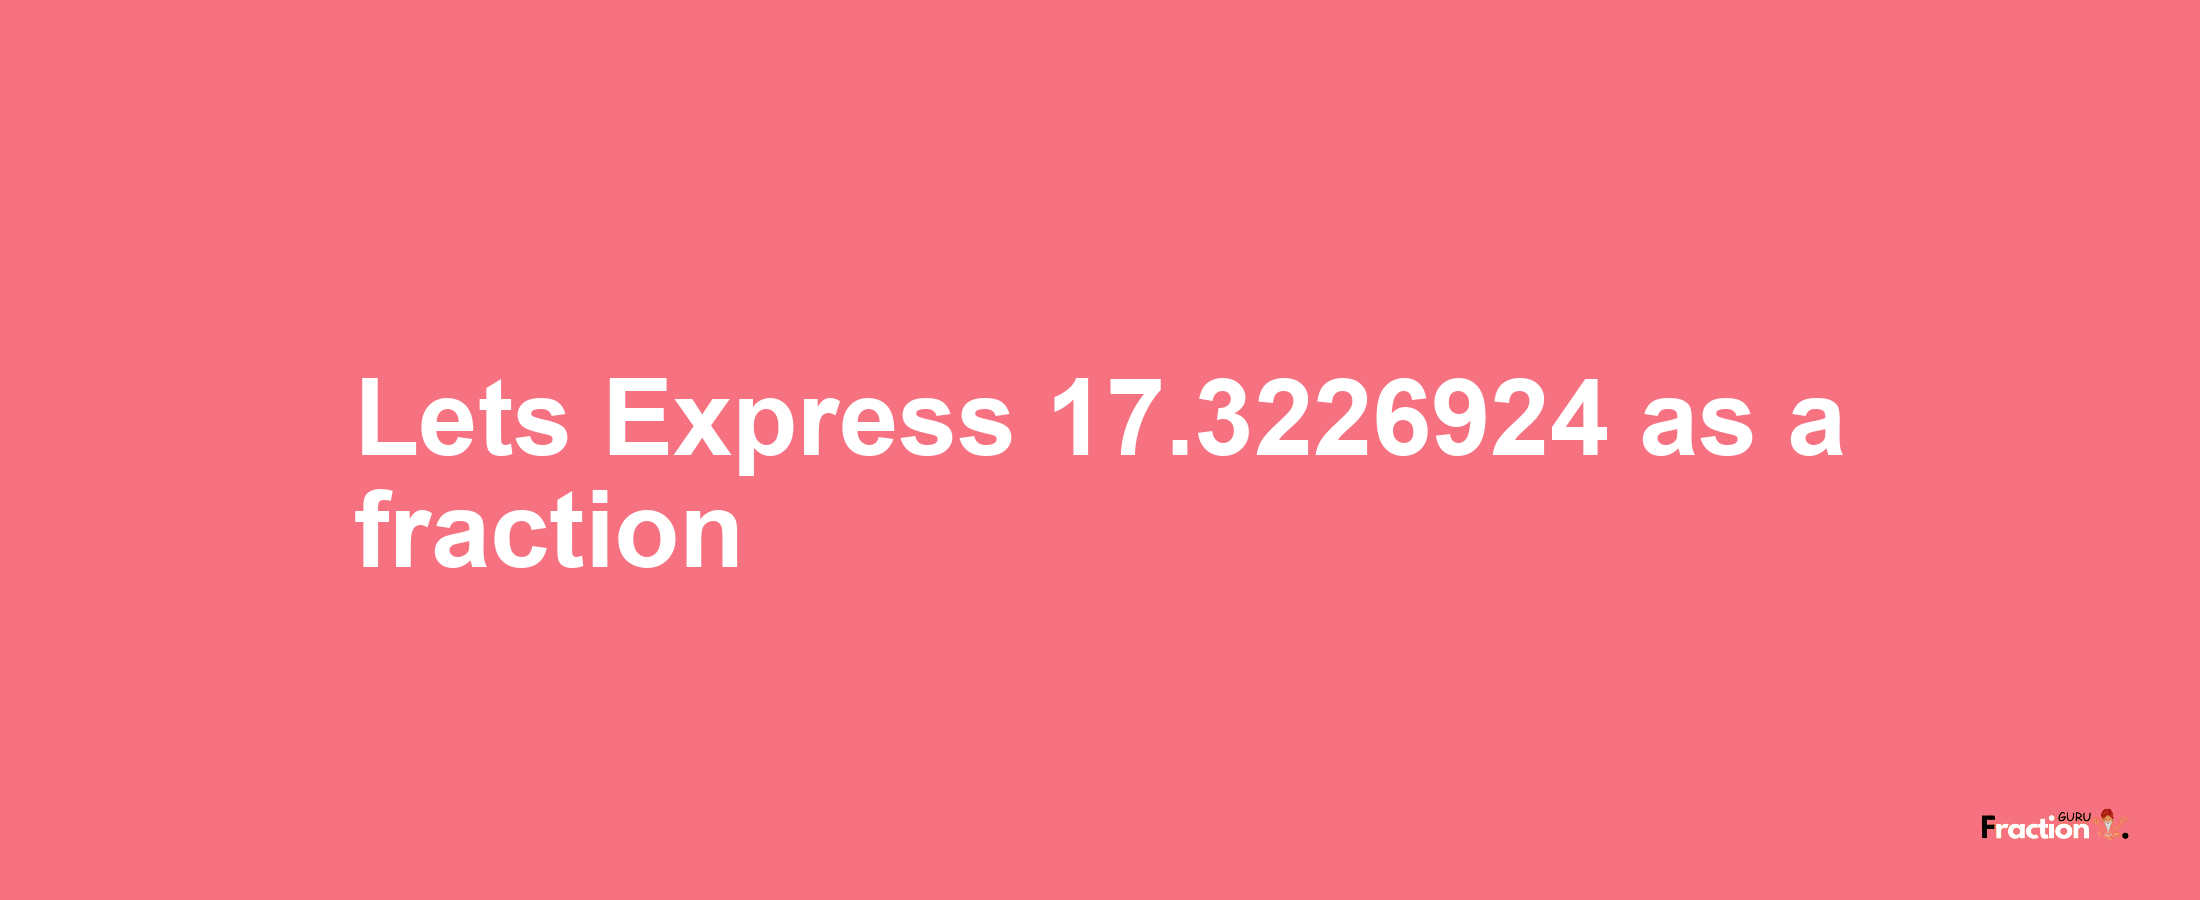 Lets Express 17.3226924 as afraction